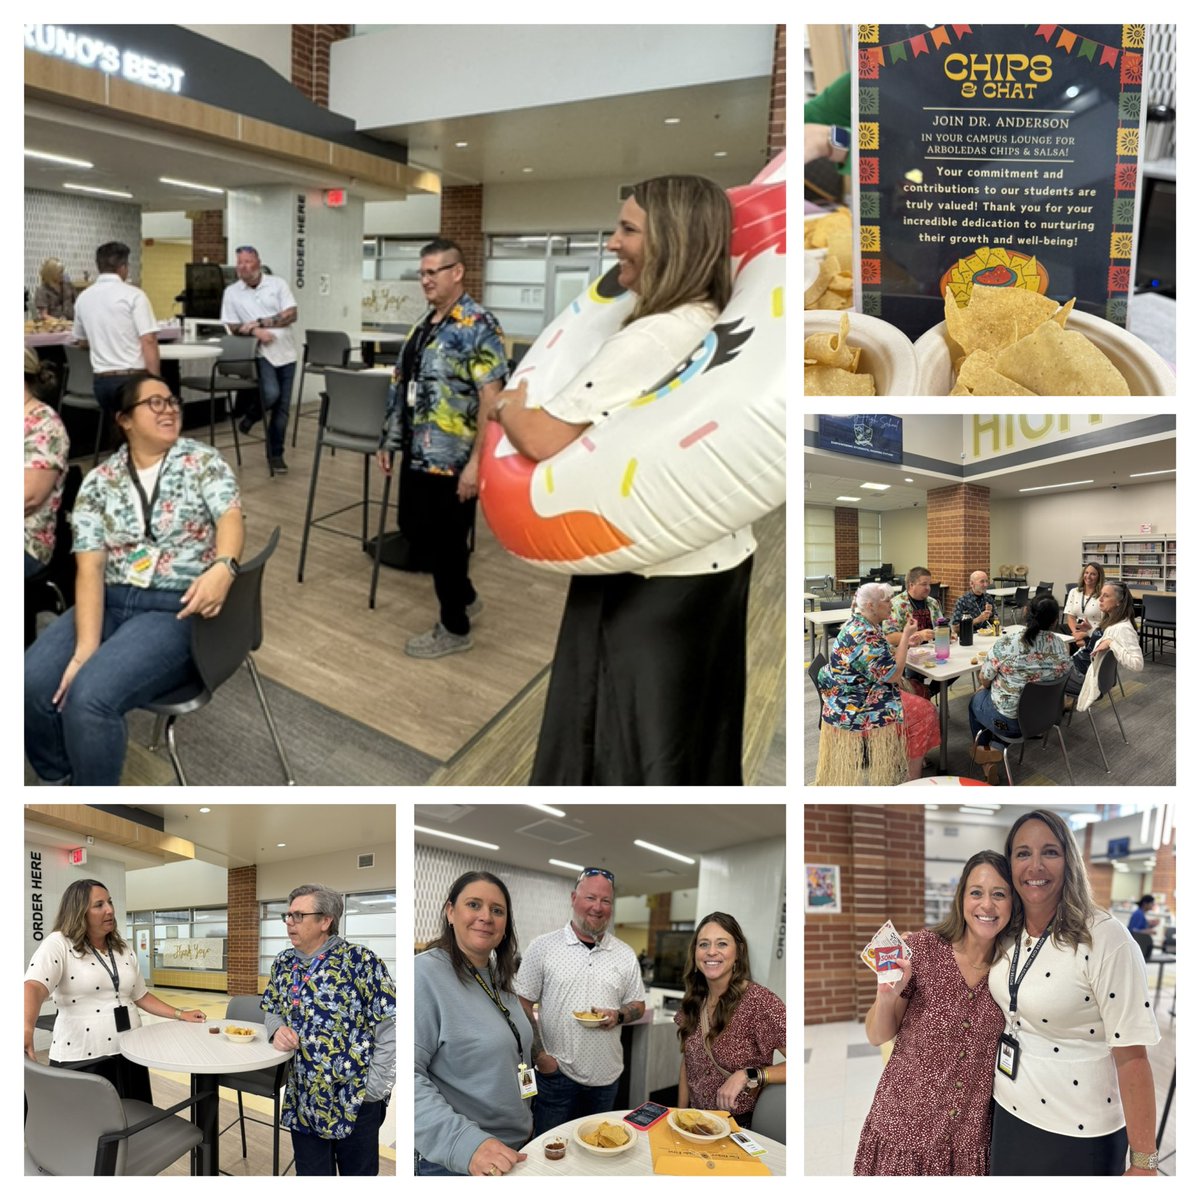 Chips & Chat with Dr. Anderson! Thank you for hanging out with #teamRCHS today! #RCISDJOY #oneRC